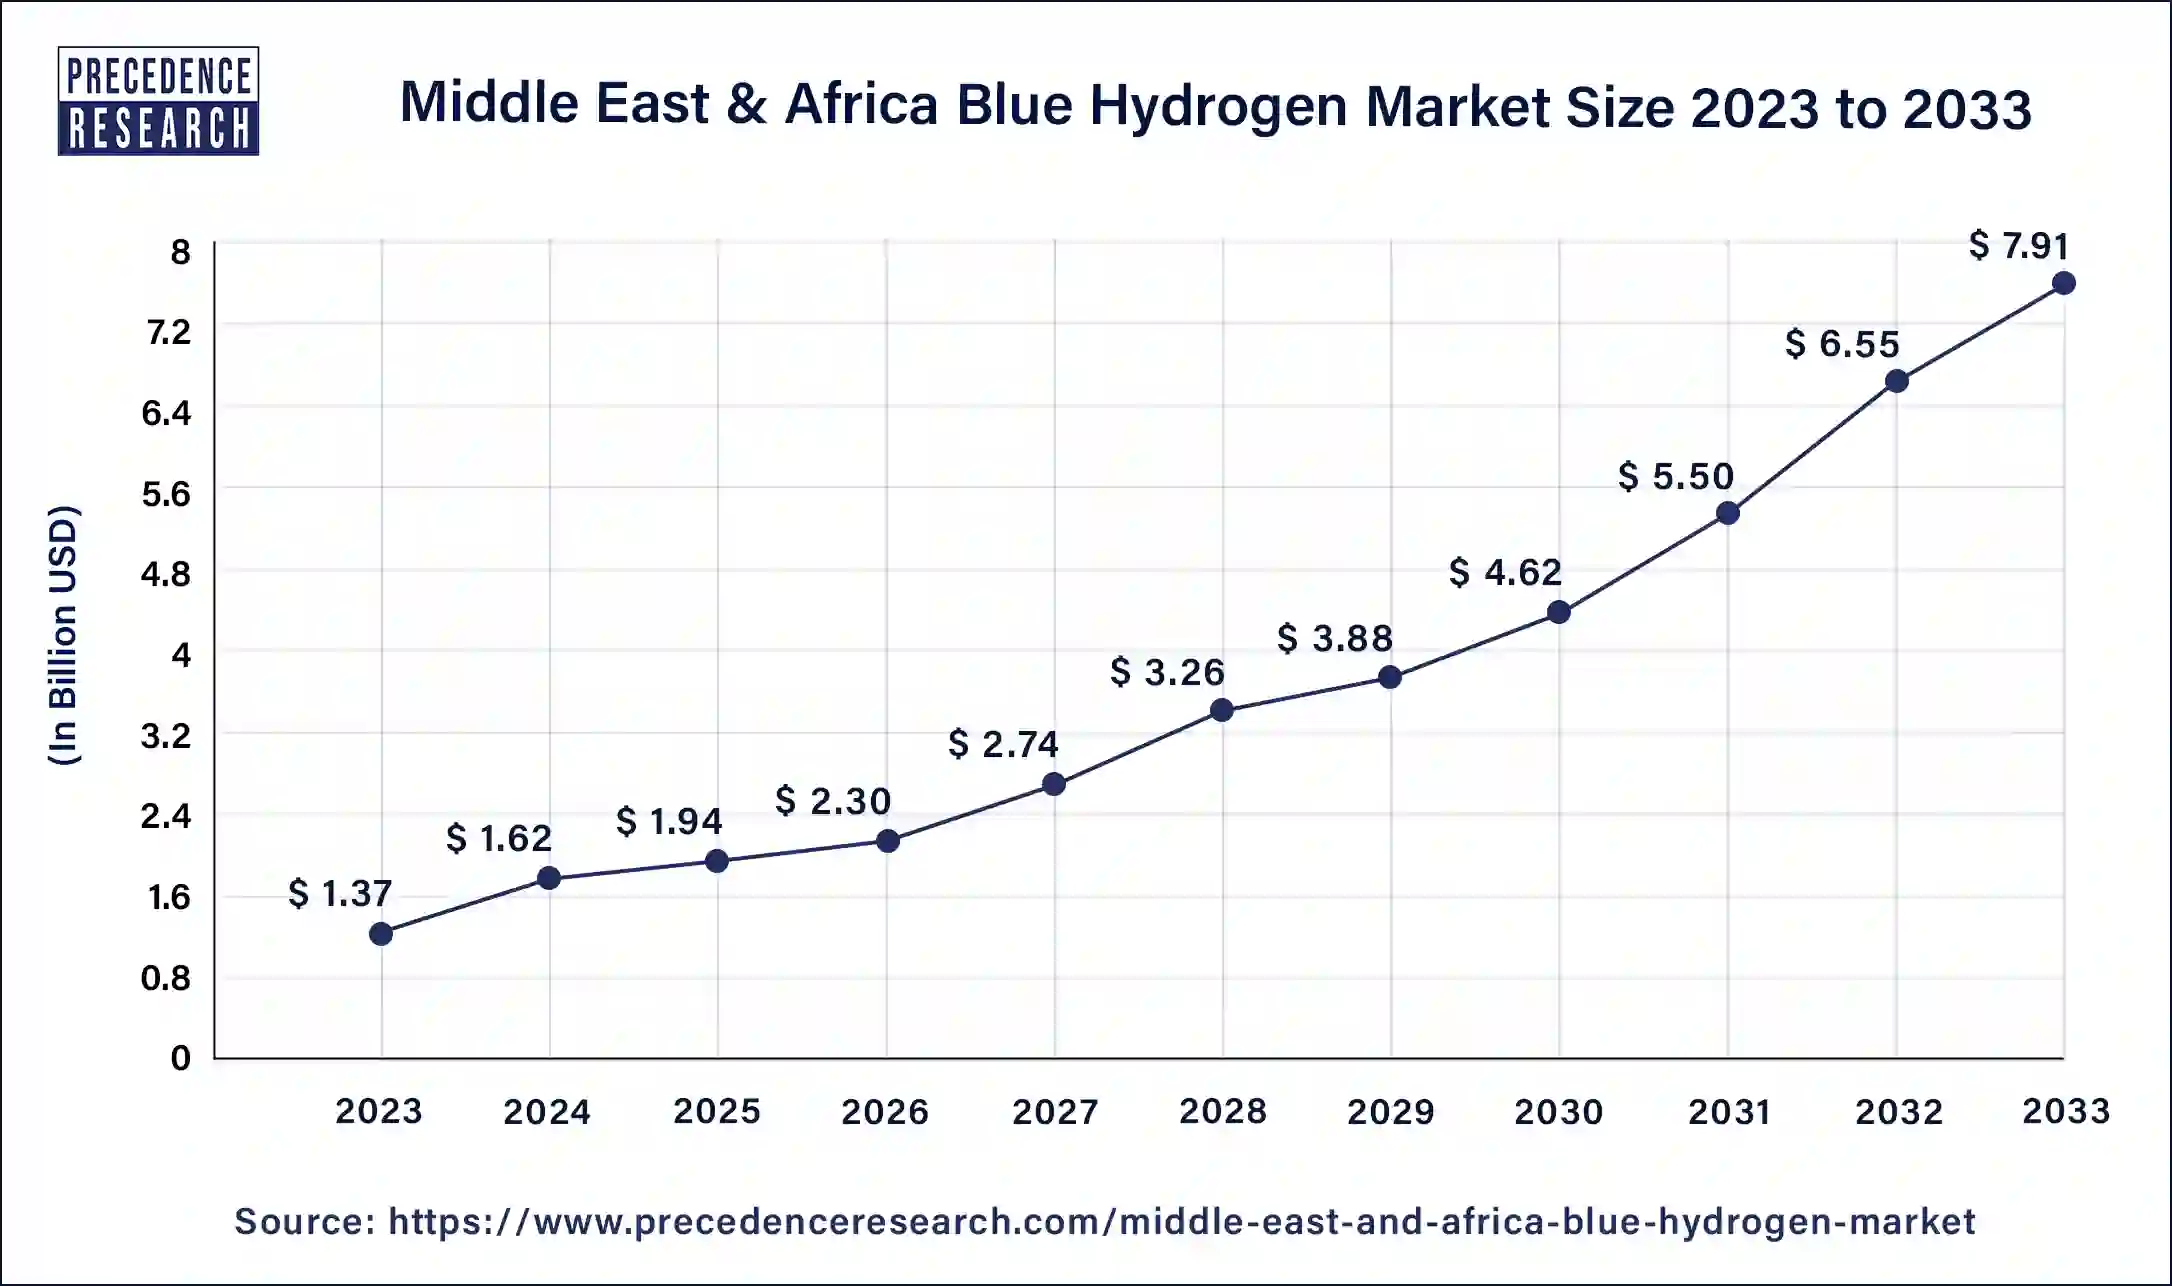 Middle East & Africa Blue Hydrogen Market Size 2024 to 2033